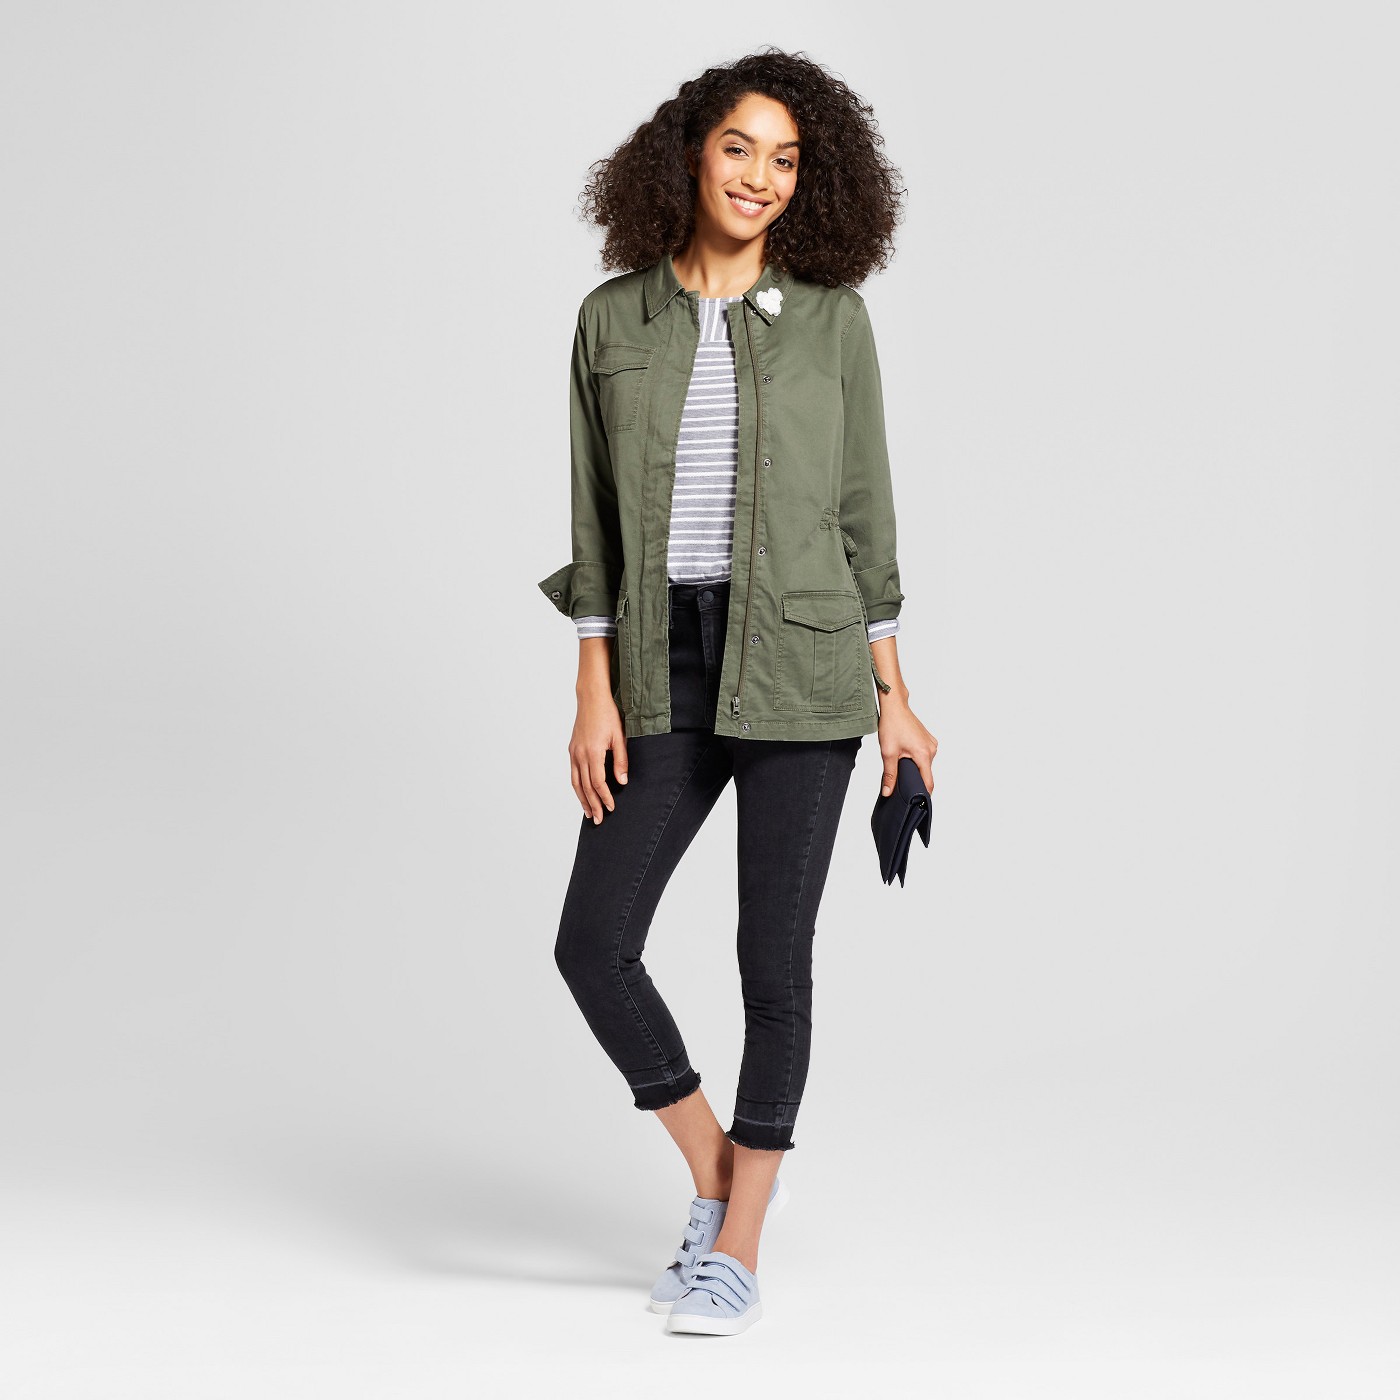 Women's Military Jacket - A New Dayâ„¢ Olive - image 3 of 3